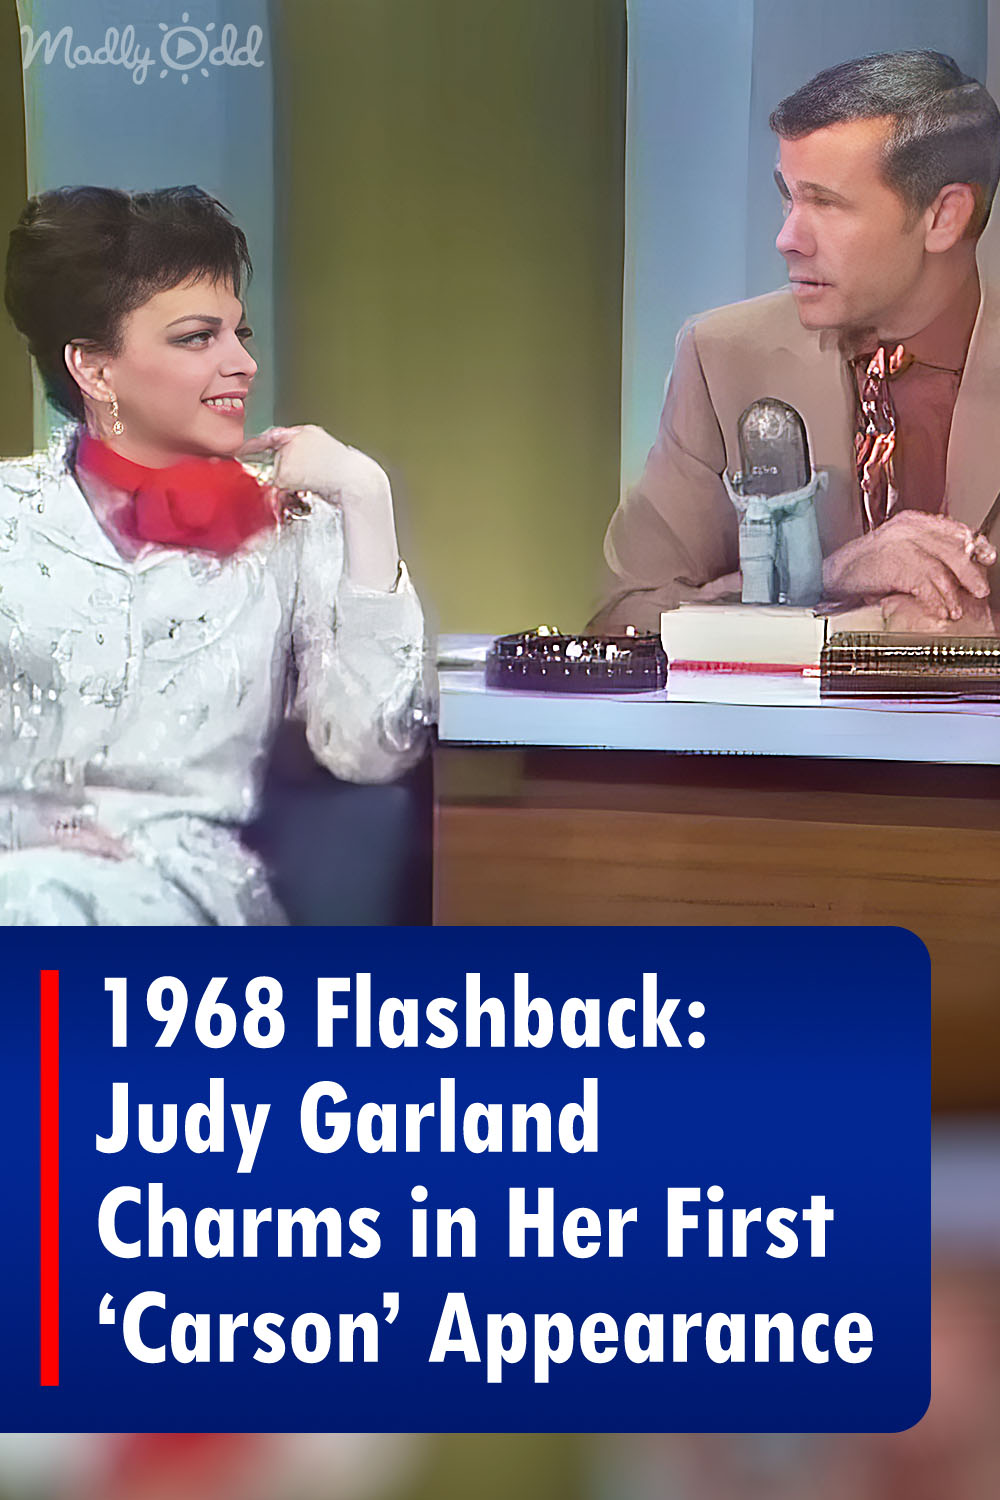 1968 Flashback: Judy Garland Charms in Her First ‘Carson’ Appearance